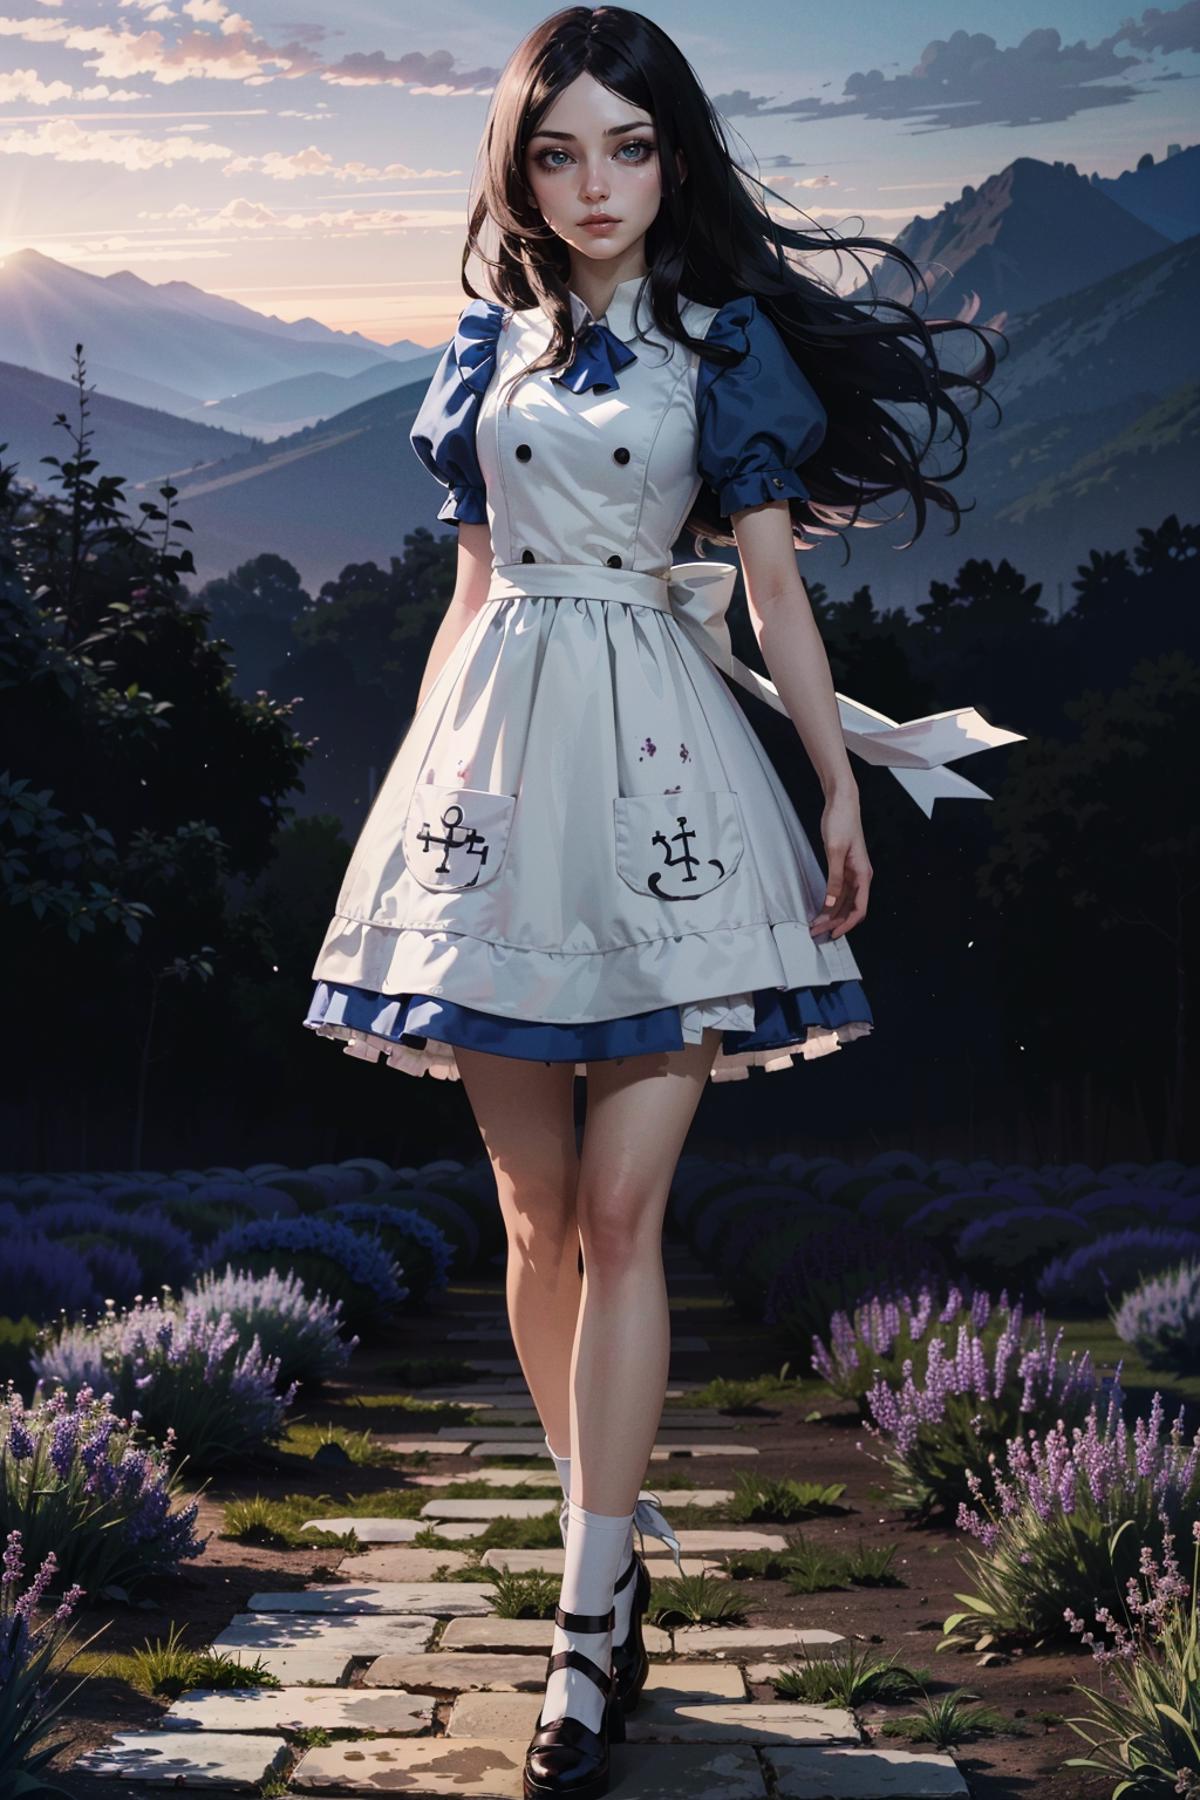 Alice from Alice: Madness Returns image by BloodRedKittie